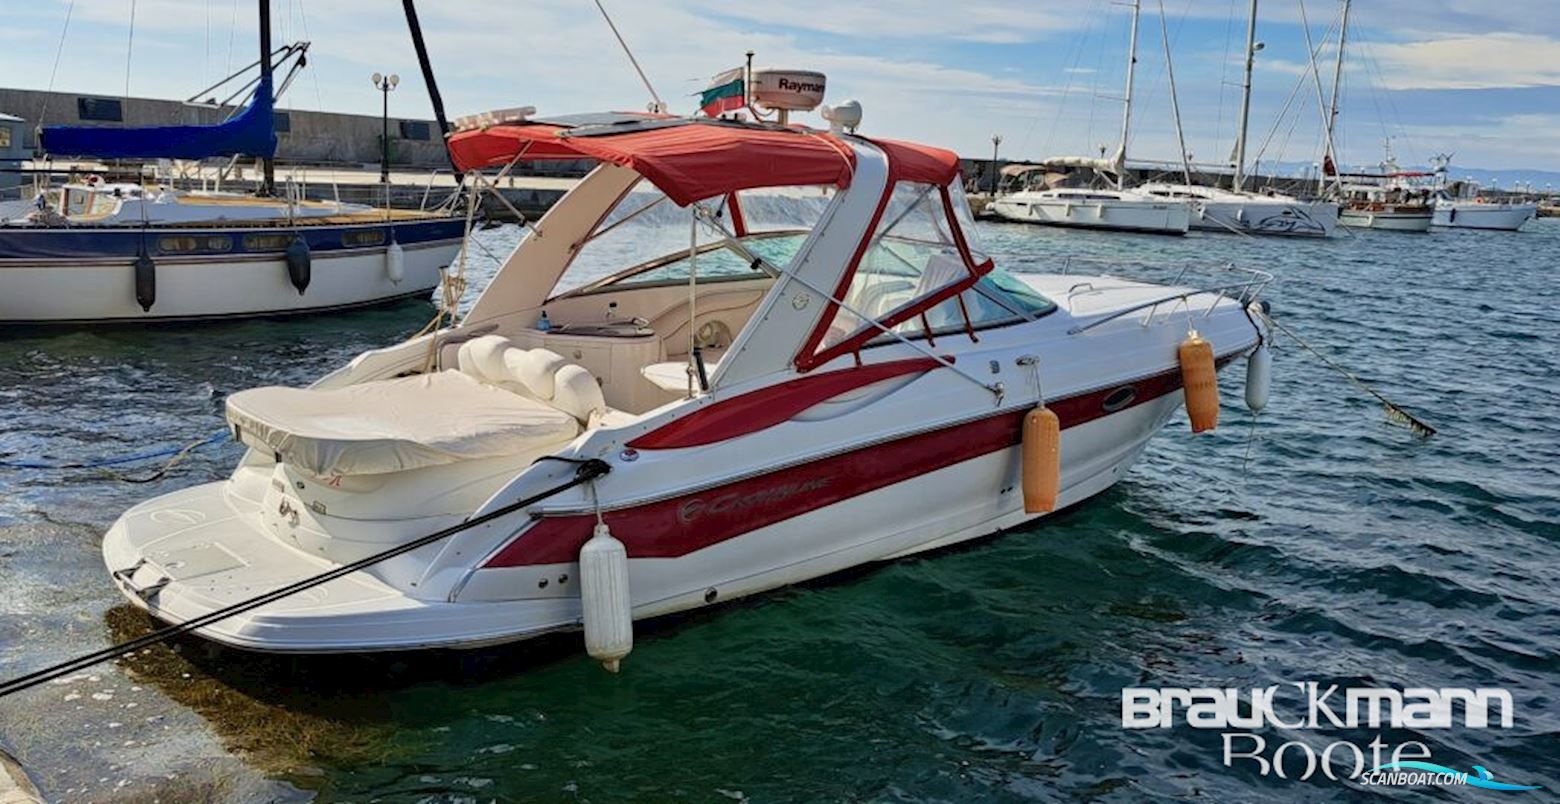 Crownline Boats 315 Scr Motor boat 2008, with Mercruiser engine, Bulgaria